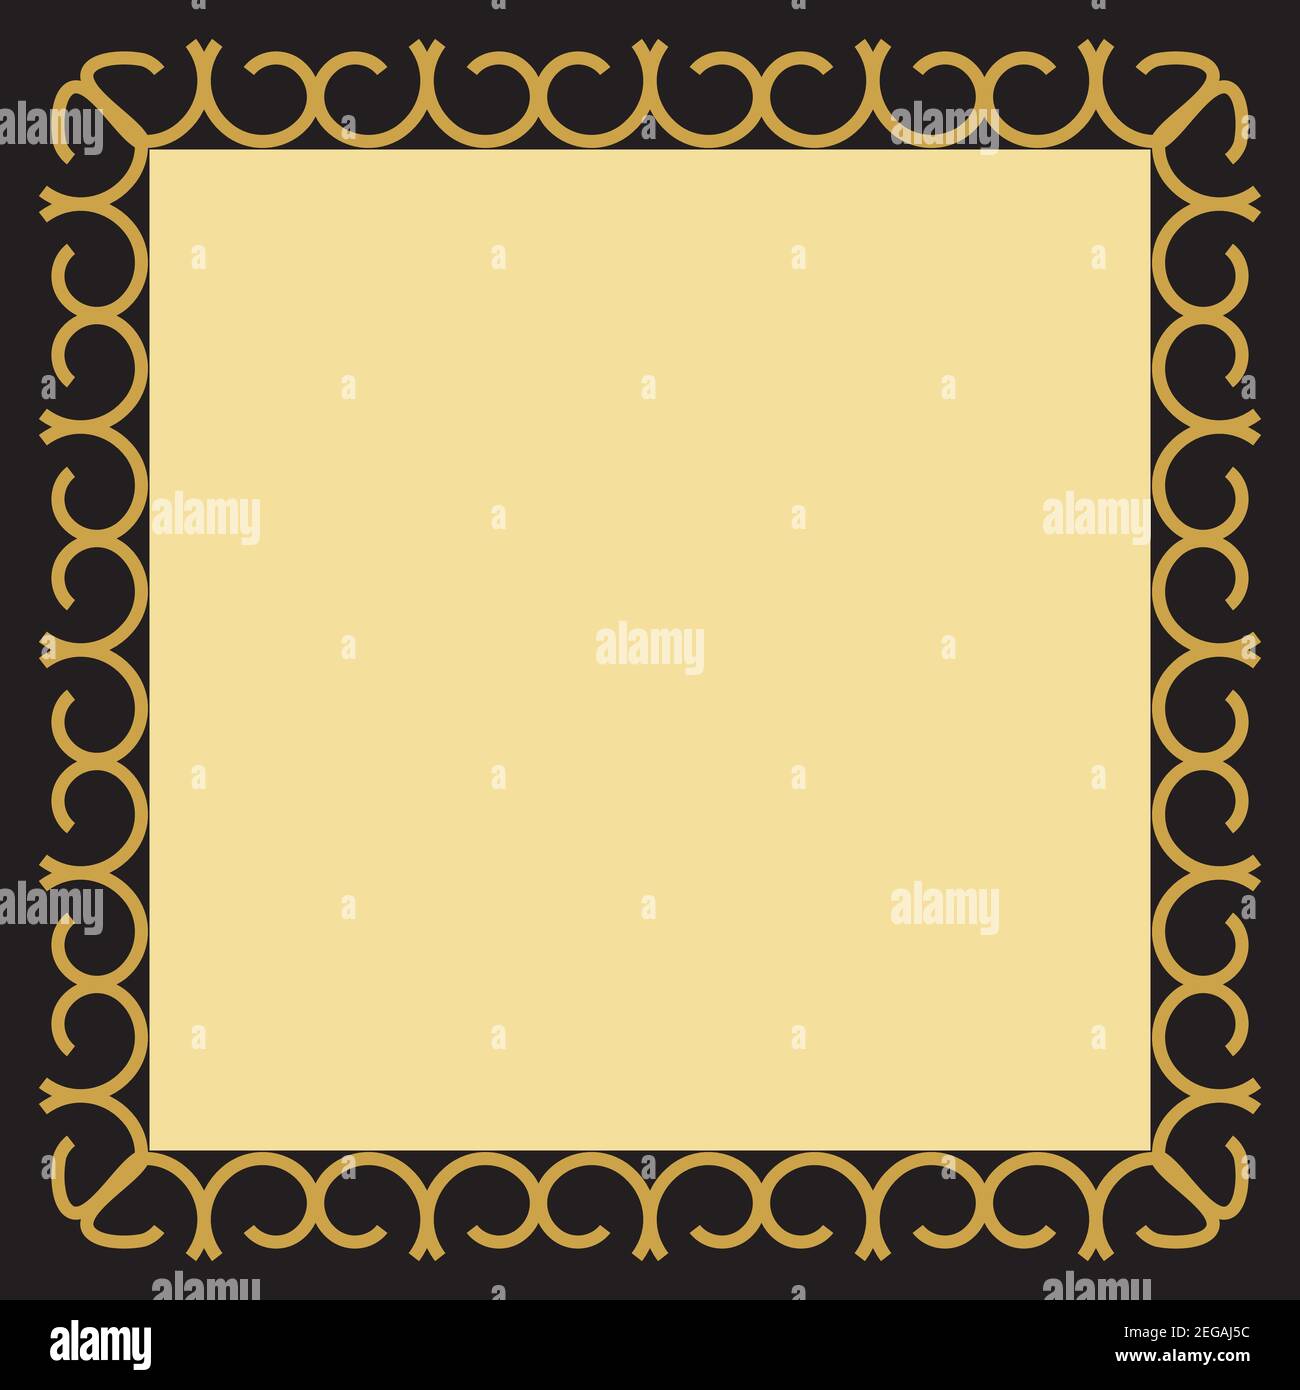 A golden text box frame background image. Stock Vector